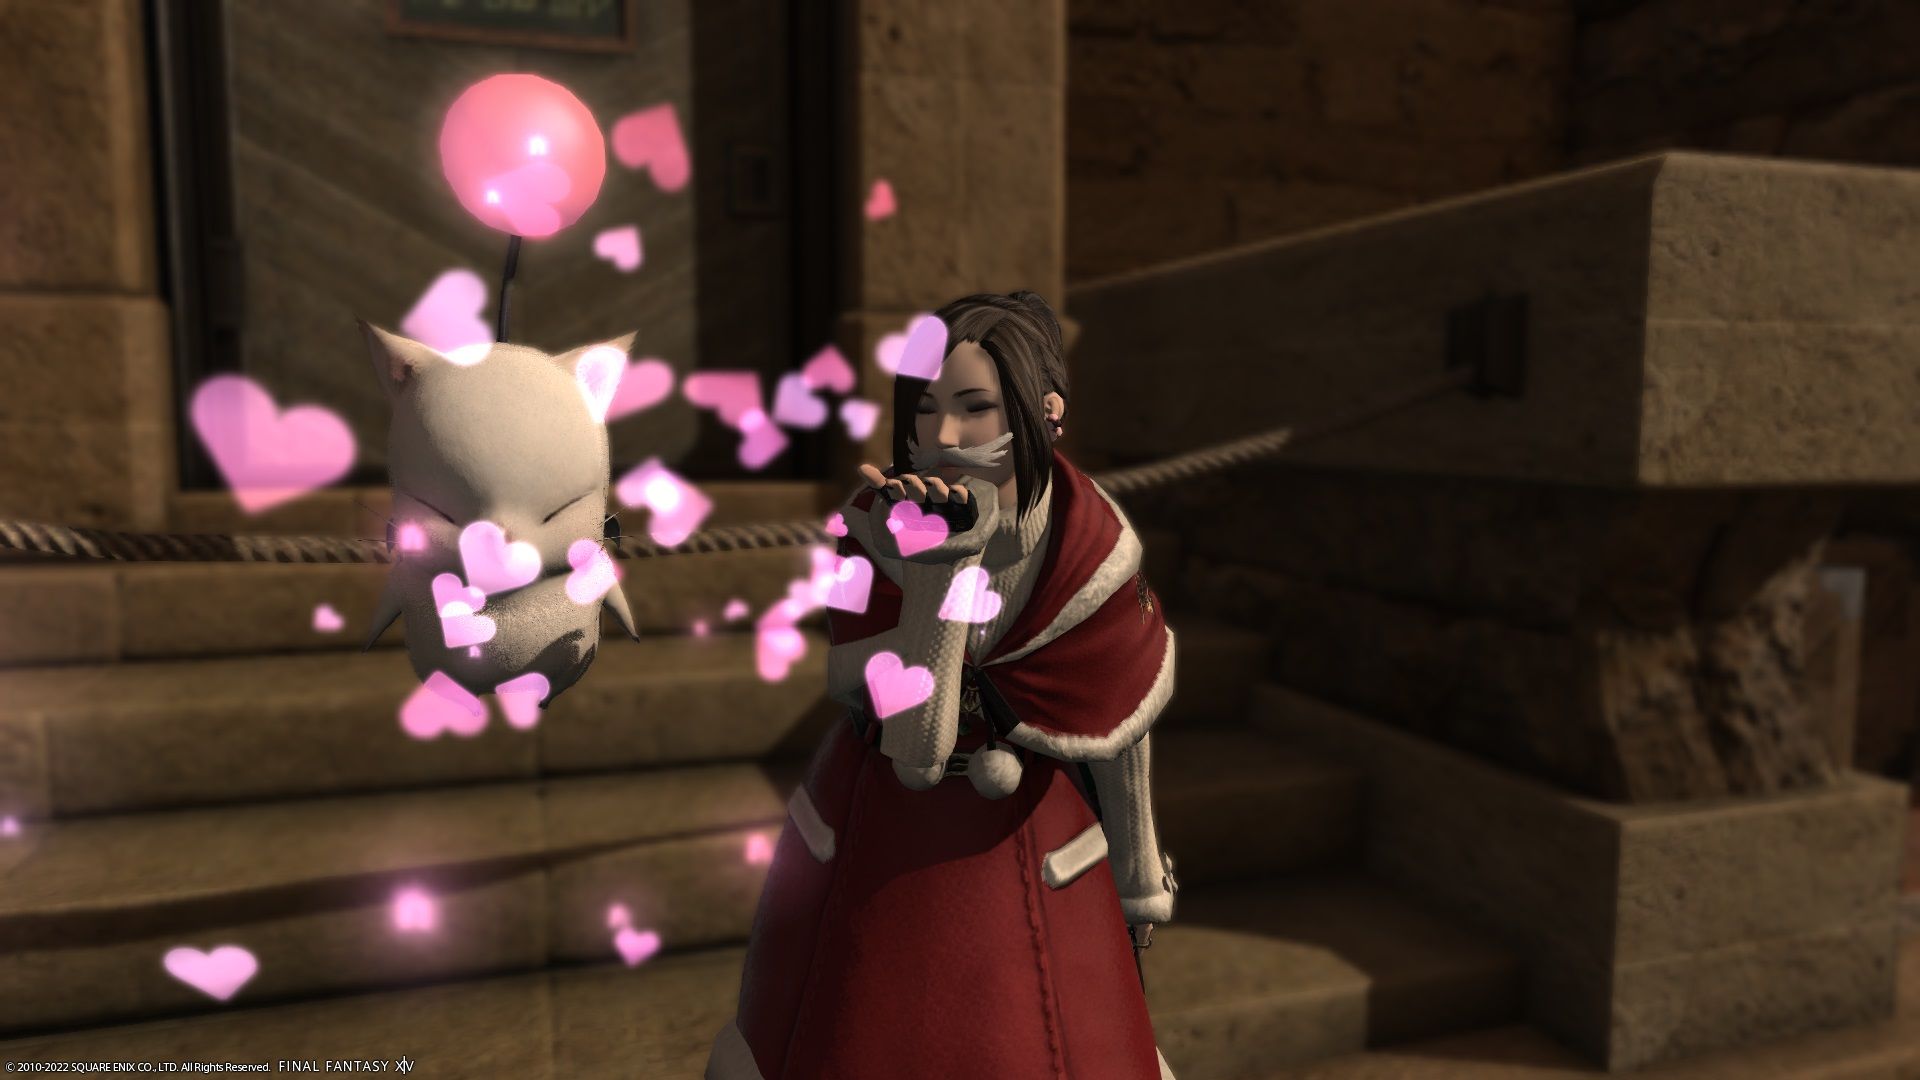 Final Fantasy 14 - player blowing kisses to a moogle